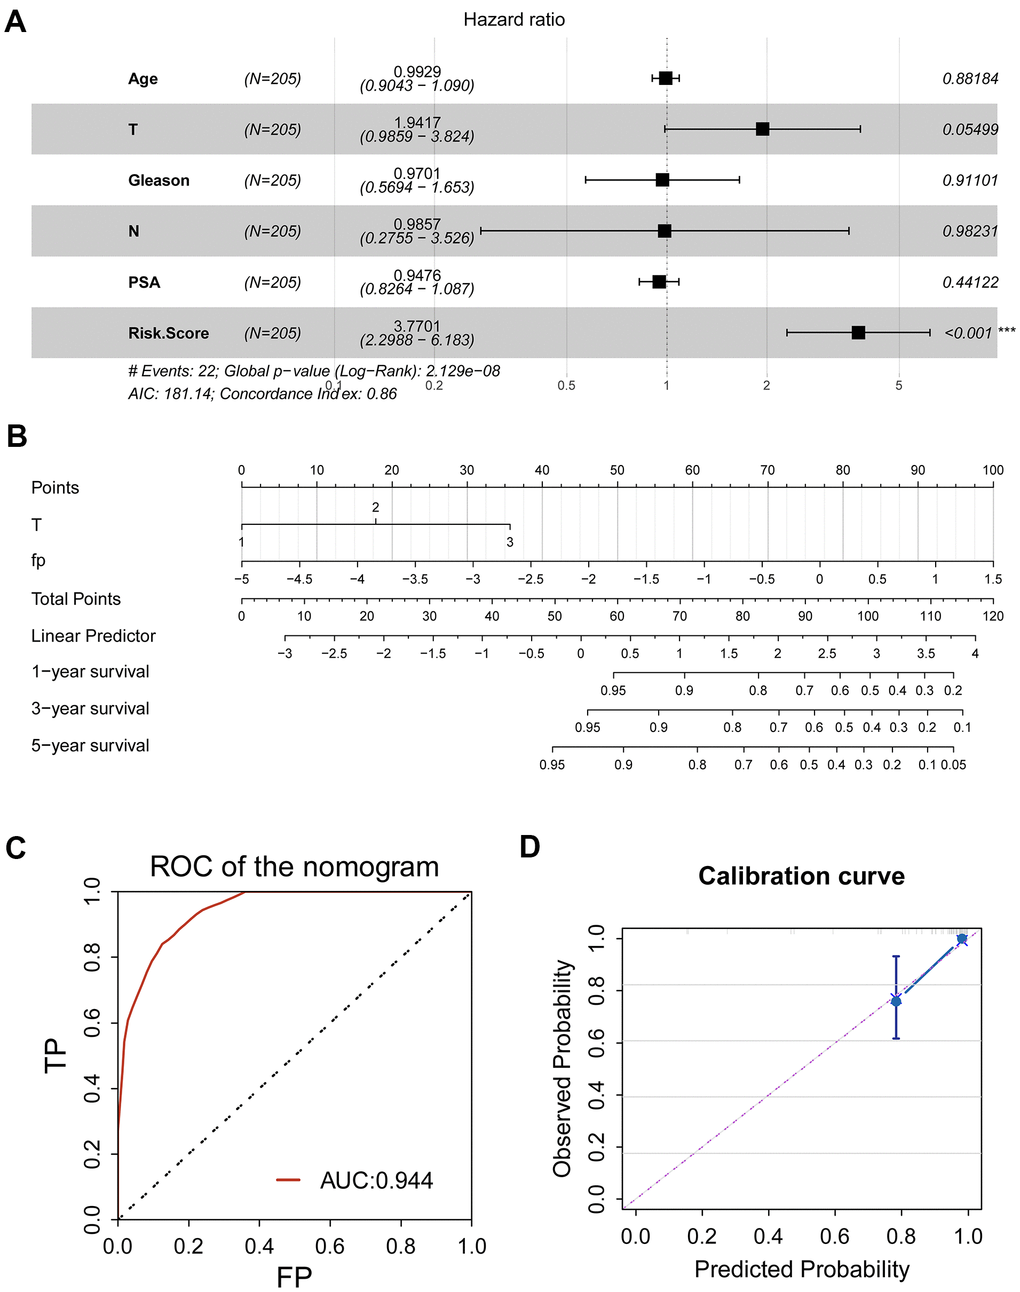 Clinical application of CR-related gene signature for PRAD patients. (A) Multivariate Cox regression was used to investigate the ability of age, clinical T stage, clinical N stage, Gleason score, prostate specific antigen (PSA) and the CR-related gene signature (risk score) to predict RFS. Risk score remained to be a valid predictor (PB) A nomogram combing risk score and clinical T stage was constructed to predict 1-, 3- and 5-year RFS for individual PRAD patient. (C) ROC analysis for nomogram showed an impressive predictive performance, with AUC of 0.944. (D) Calibration curve showed agreement between actual and predicted RFS, indicating an ideal predictive capability.